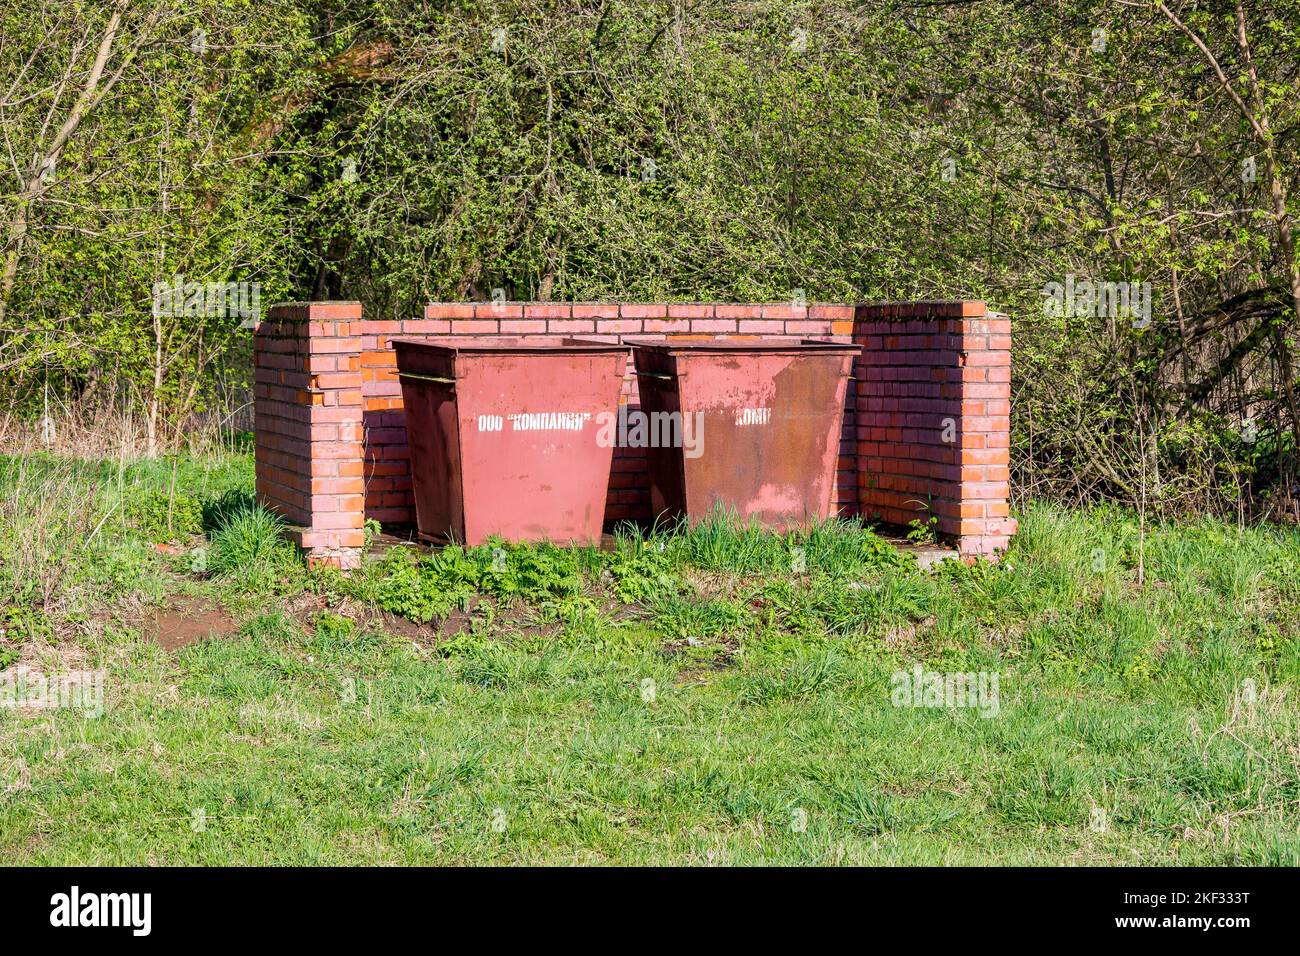 Garbage cans in nature in a brick shelter, garbage disposal site: Russia - May 2020 Stock Photo